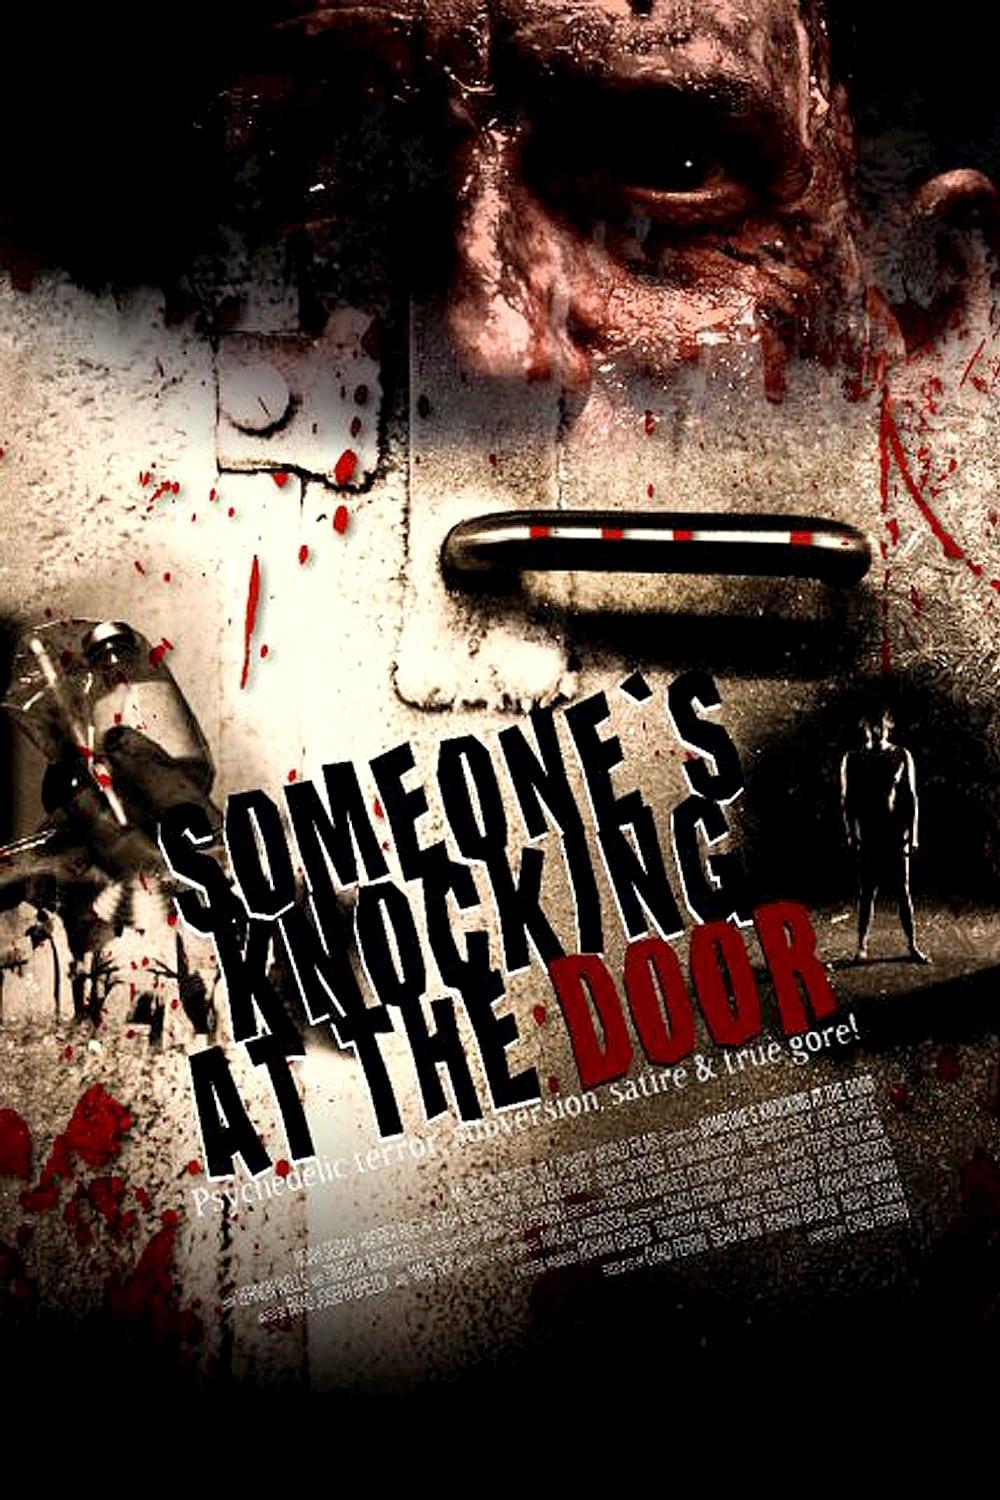 Someone's Knocking at the Door poster